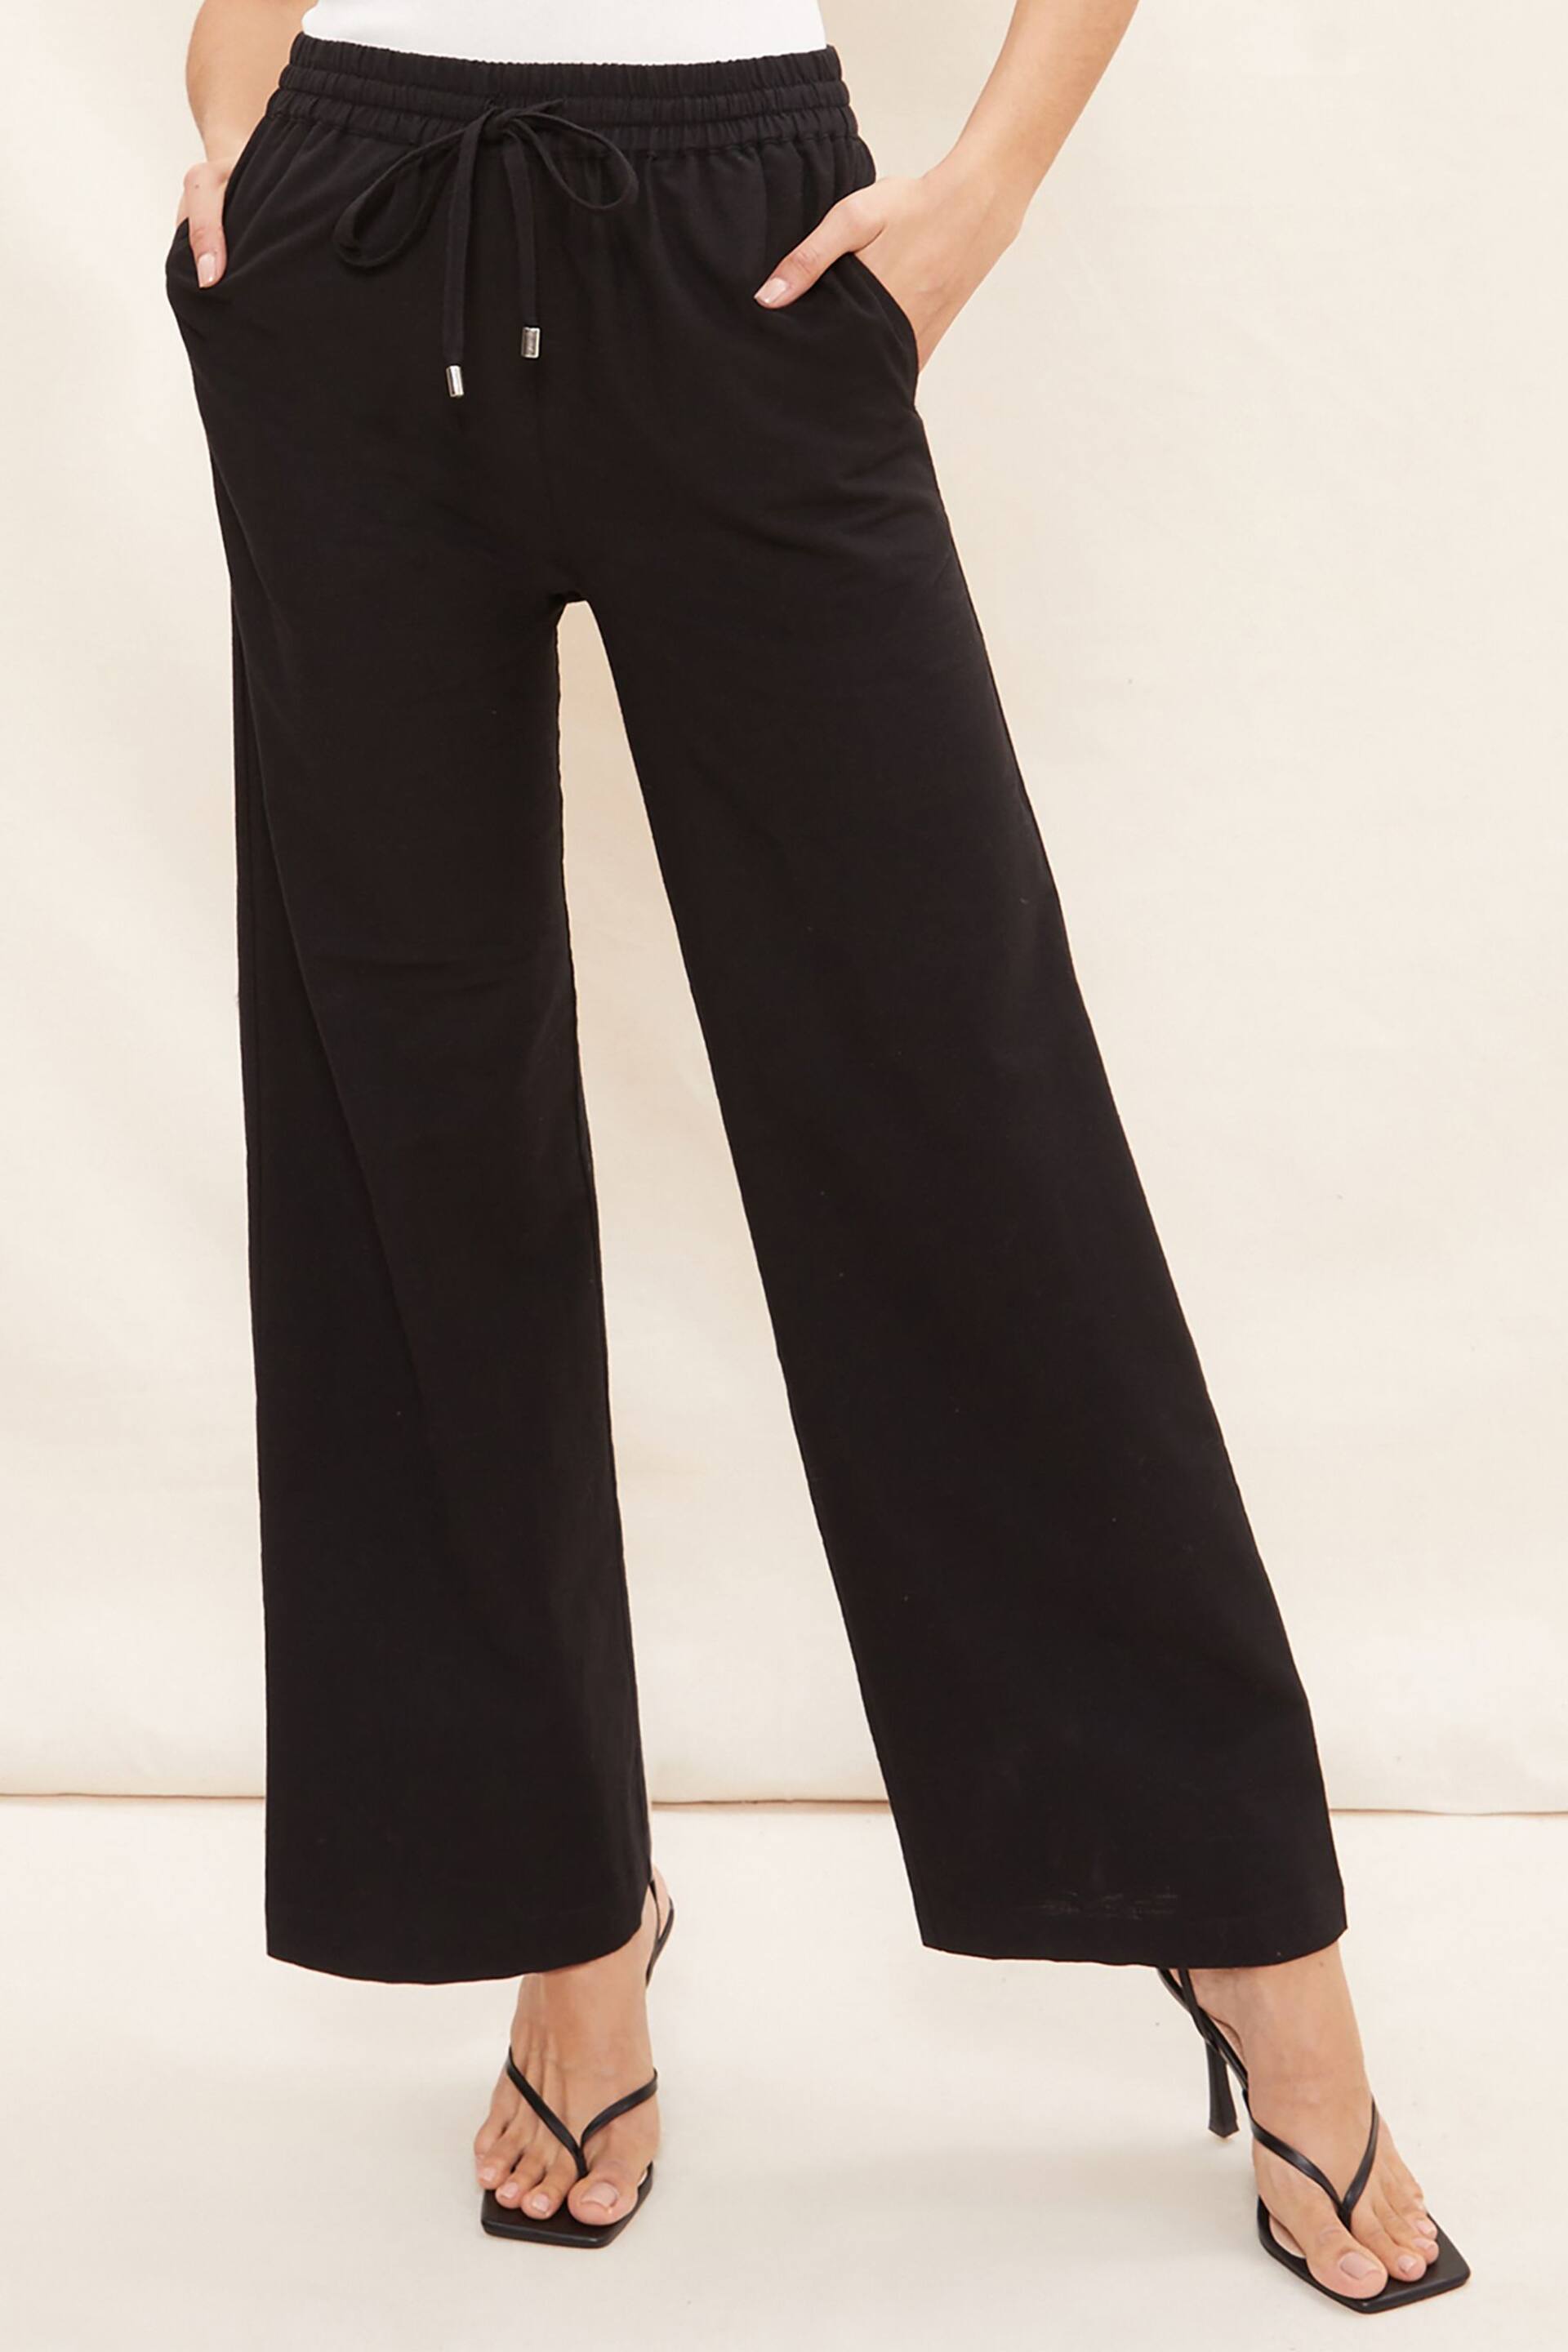 Friends Like These Black Petite Wide Leg Trousers With Linen - Image 1 of 4